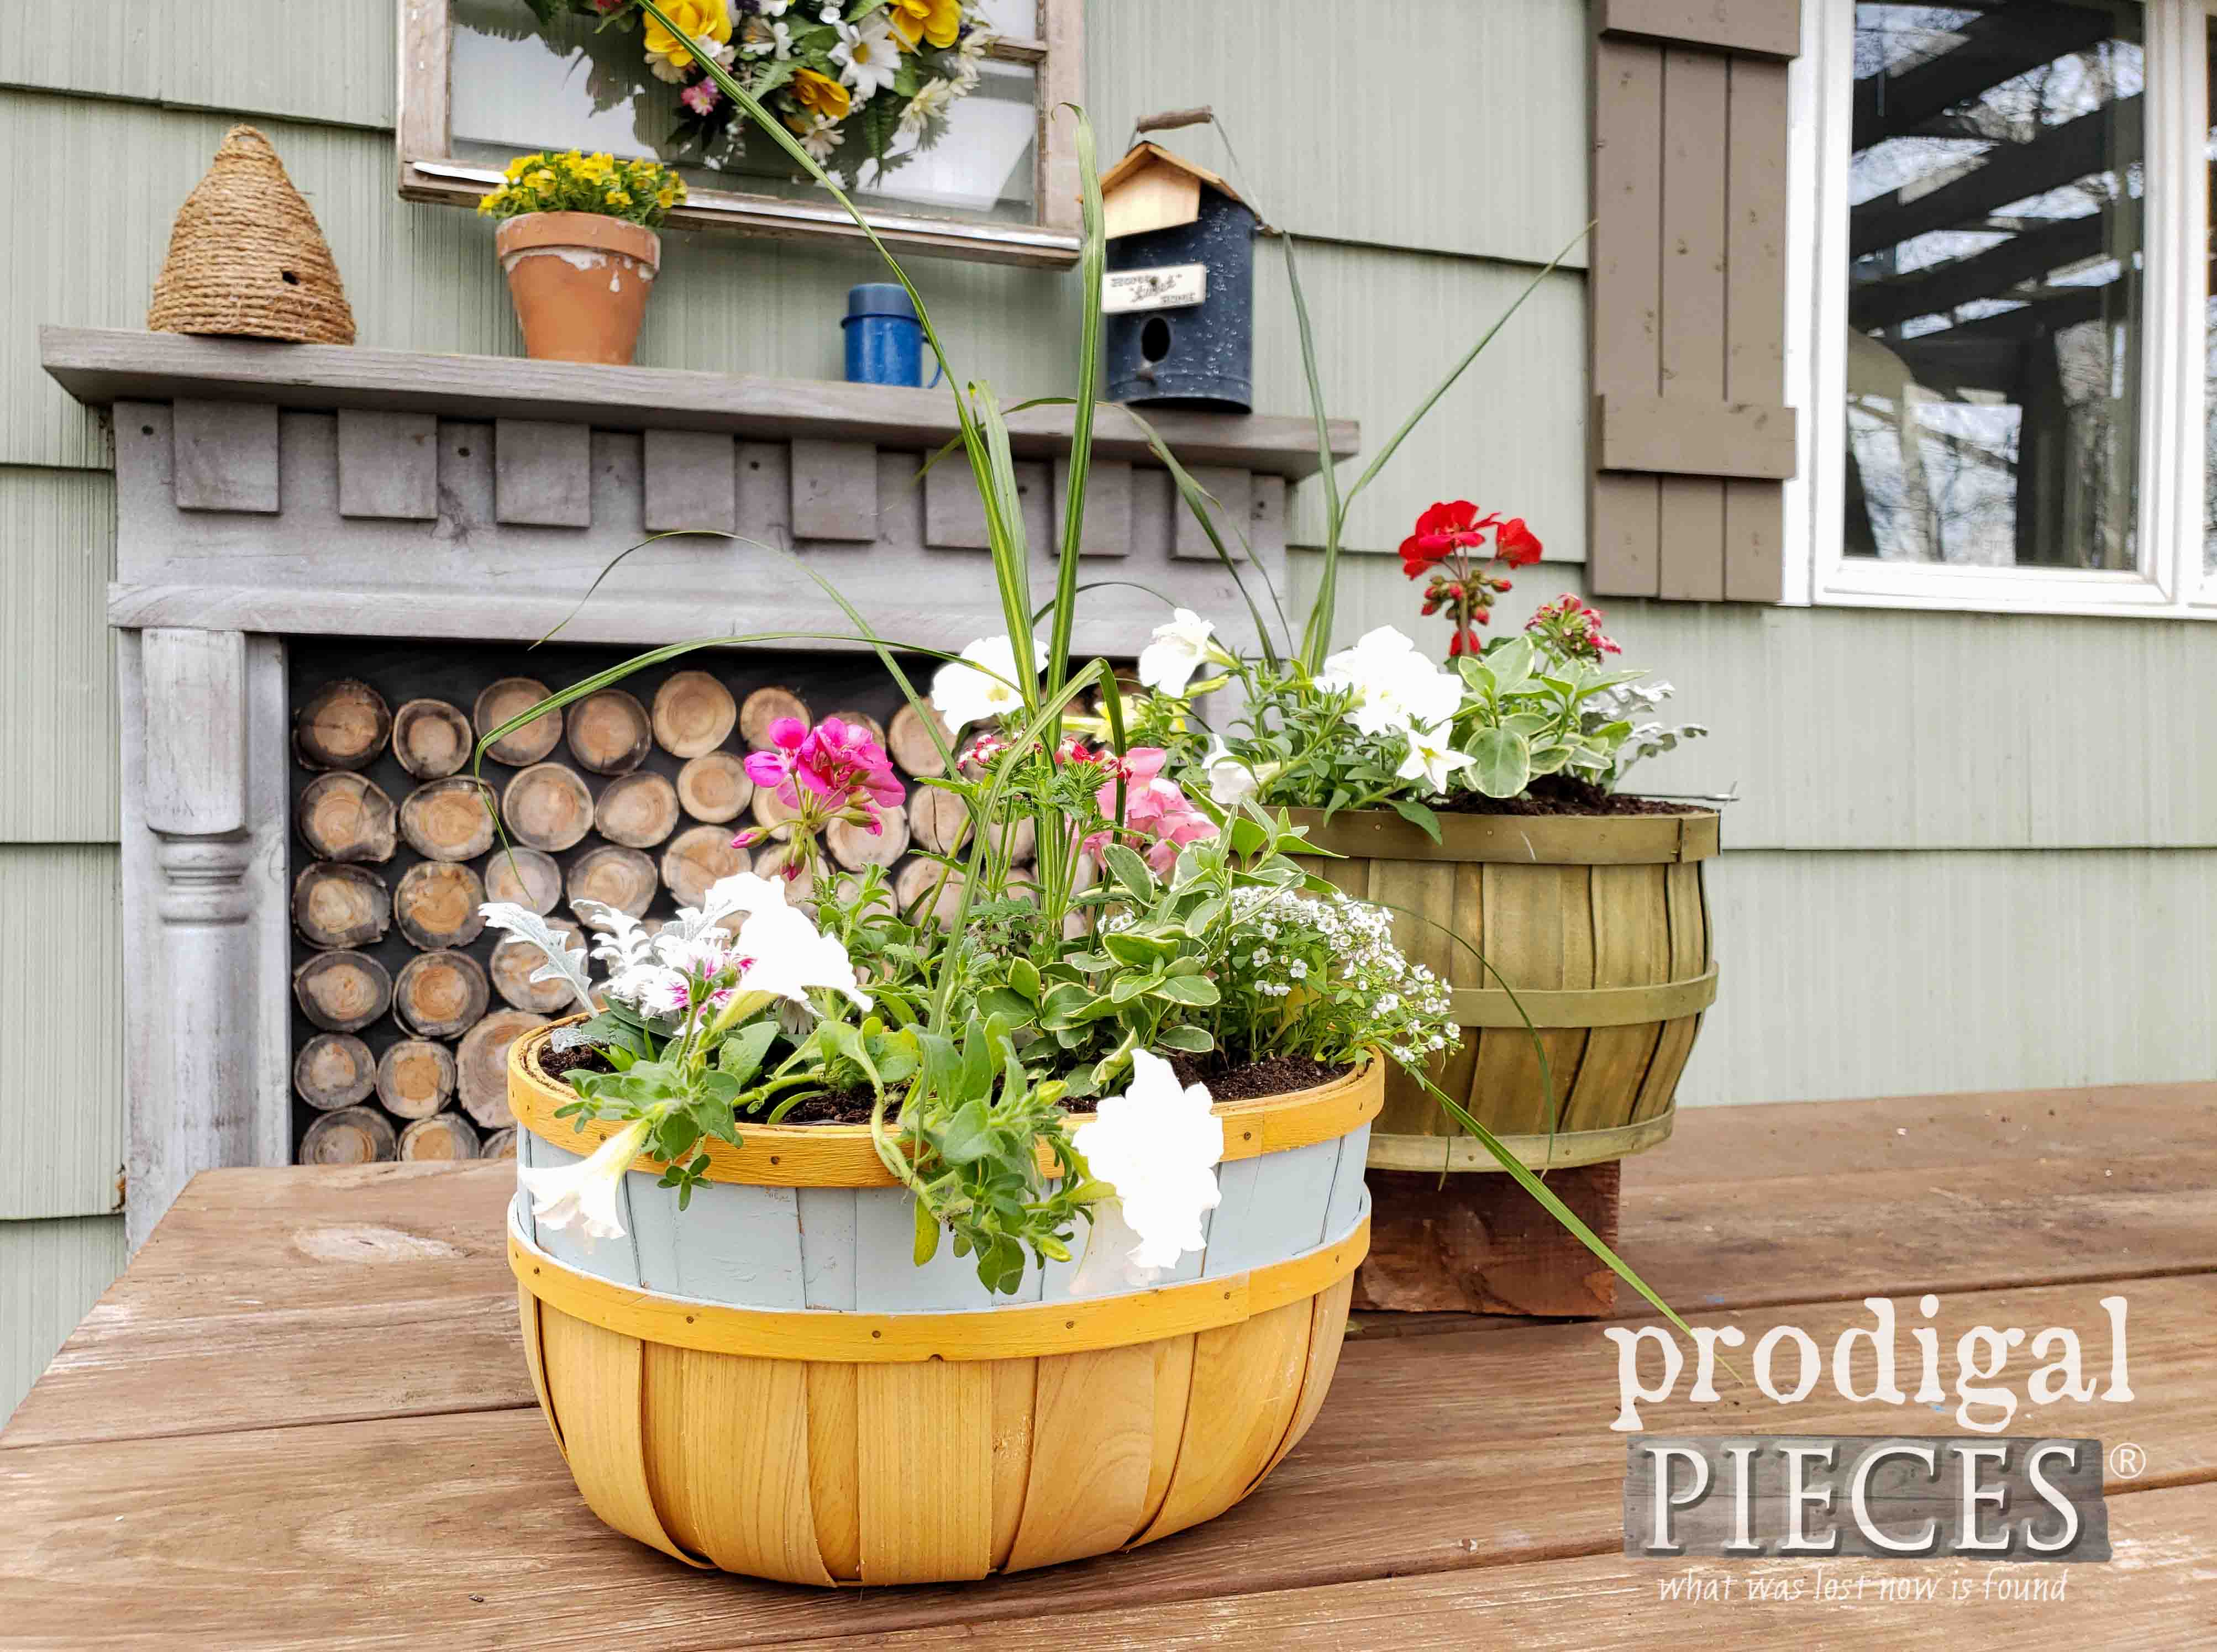 DIY Budget-Friendly Mothers Day Flower Basket Video Tutorial | Get the kids involved and have fun! | Head to prodigalpieces.com #prodigalpieces #diy #flowers #mothersday #giftideas #home #homedecor #garden